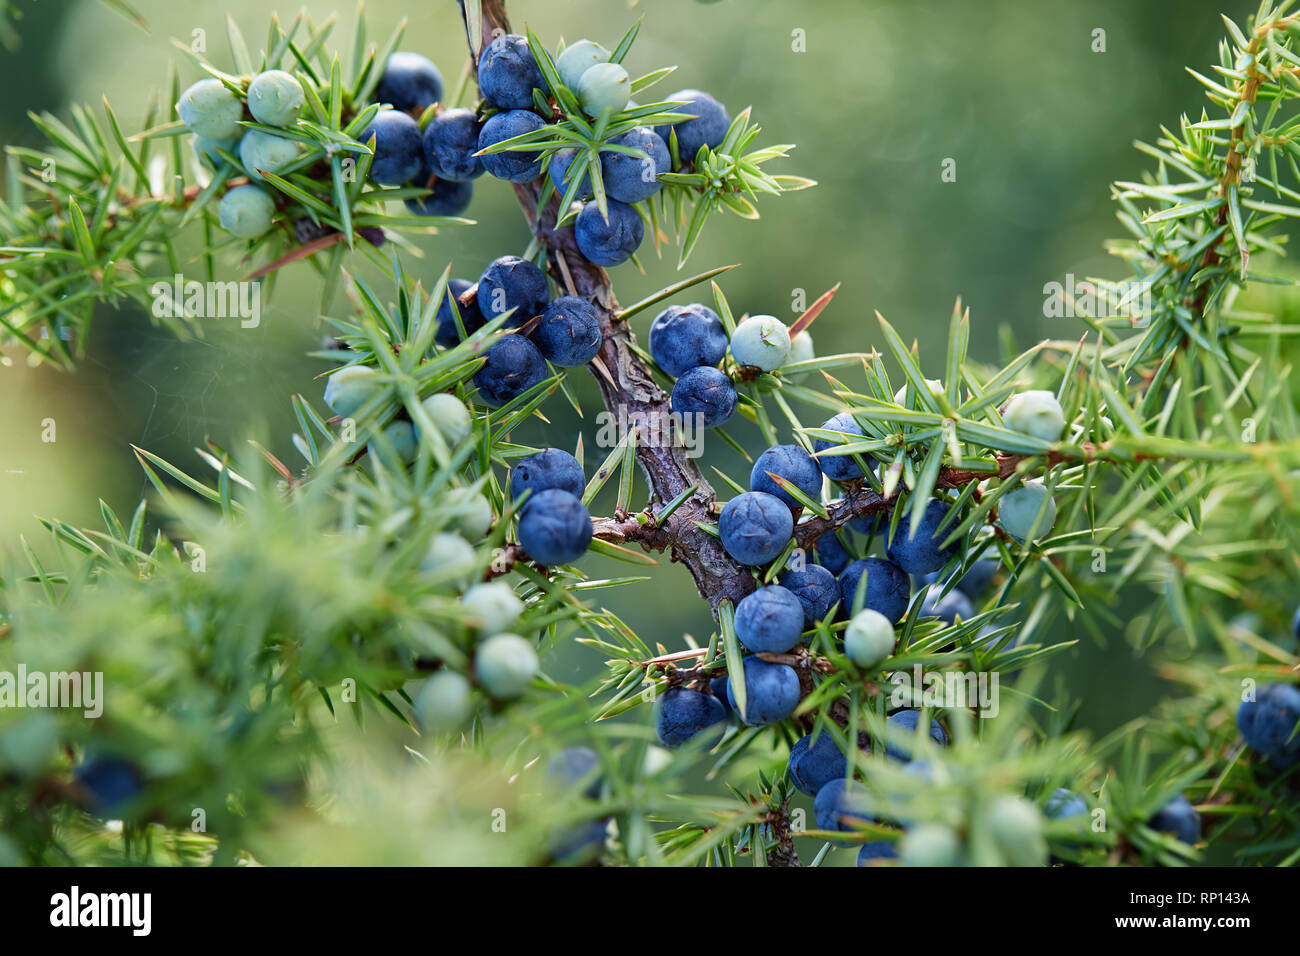 Close-Up Of Juniper Berries Growing On Tree.  Juniper branch with blue and green berries growing outside. Stock Photo